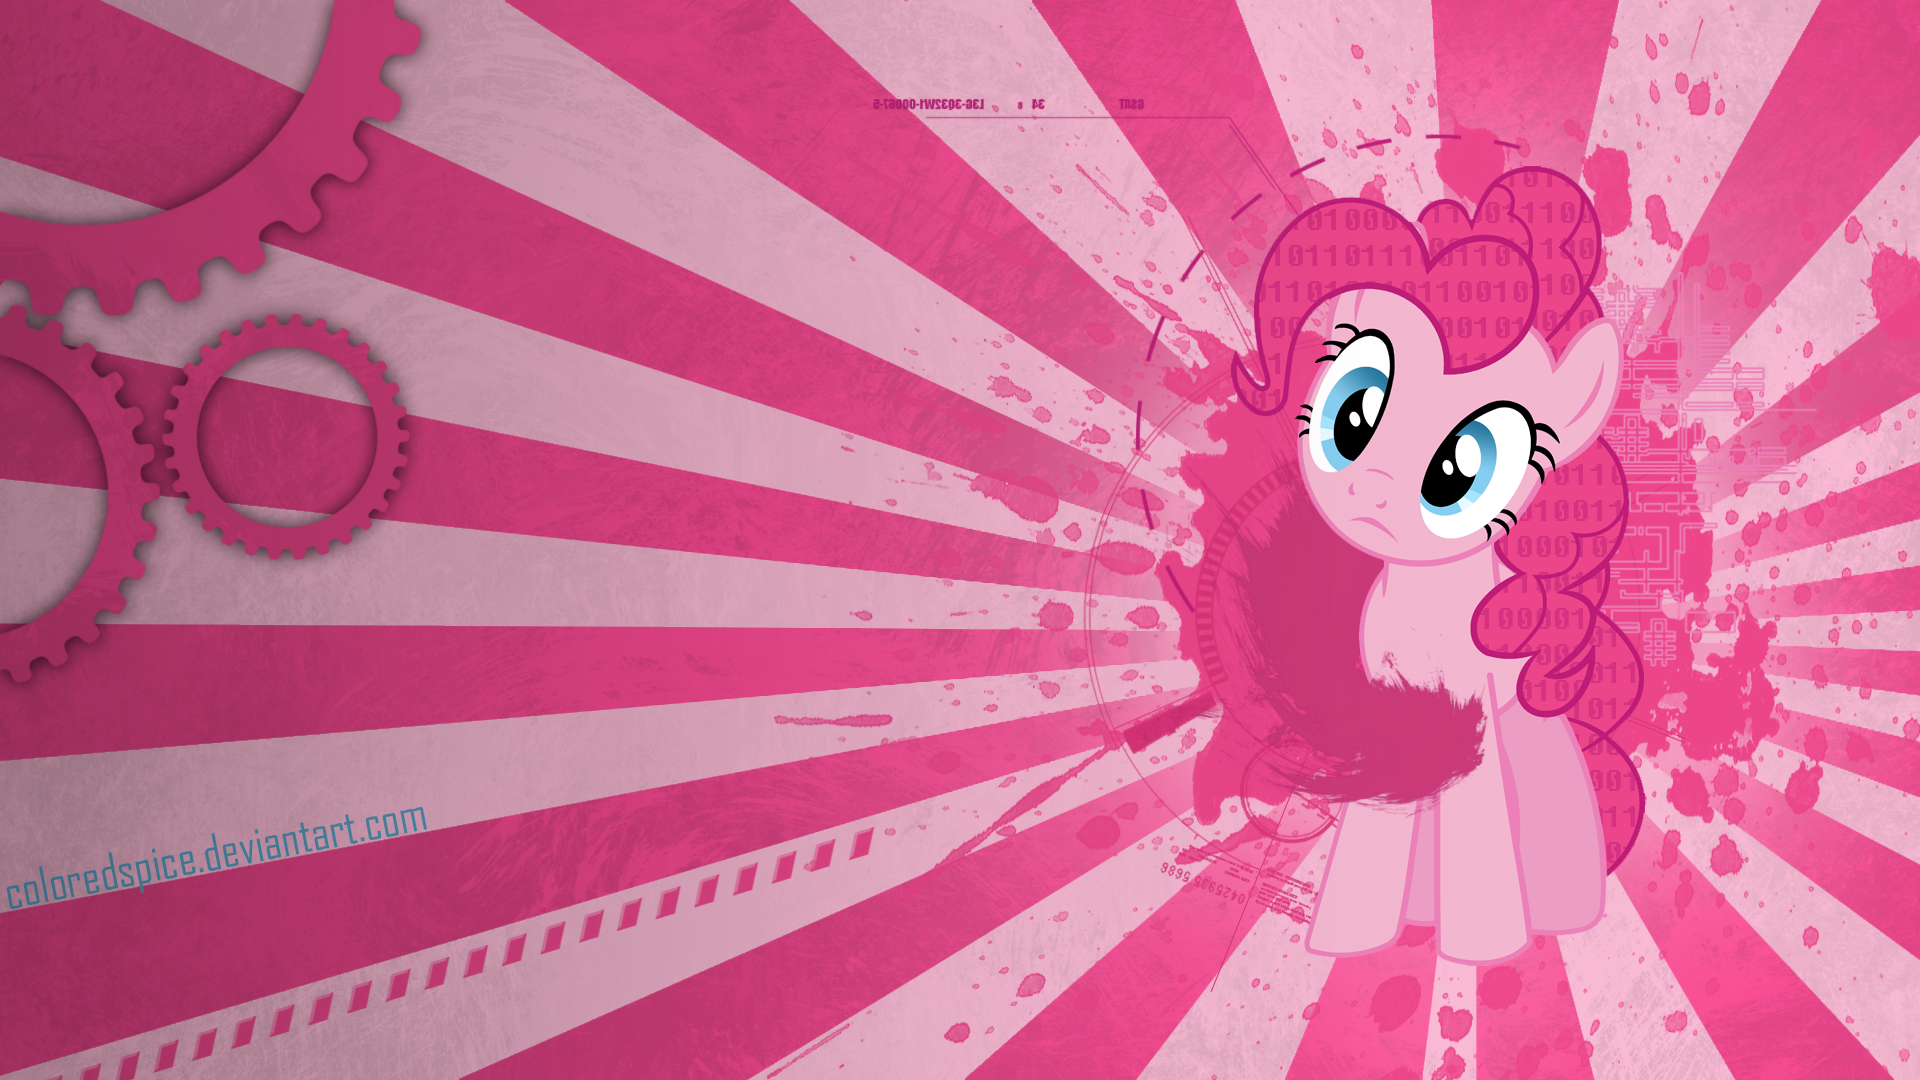 A Pinkie Pie Wallpaper by BobtheLurker and ColoredSpice